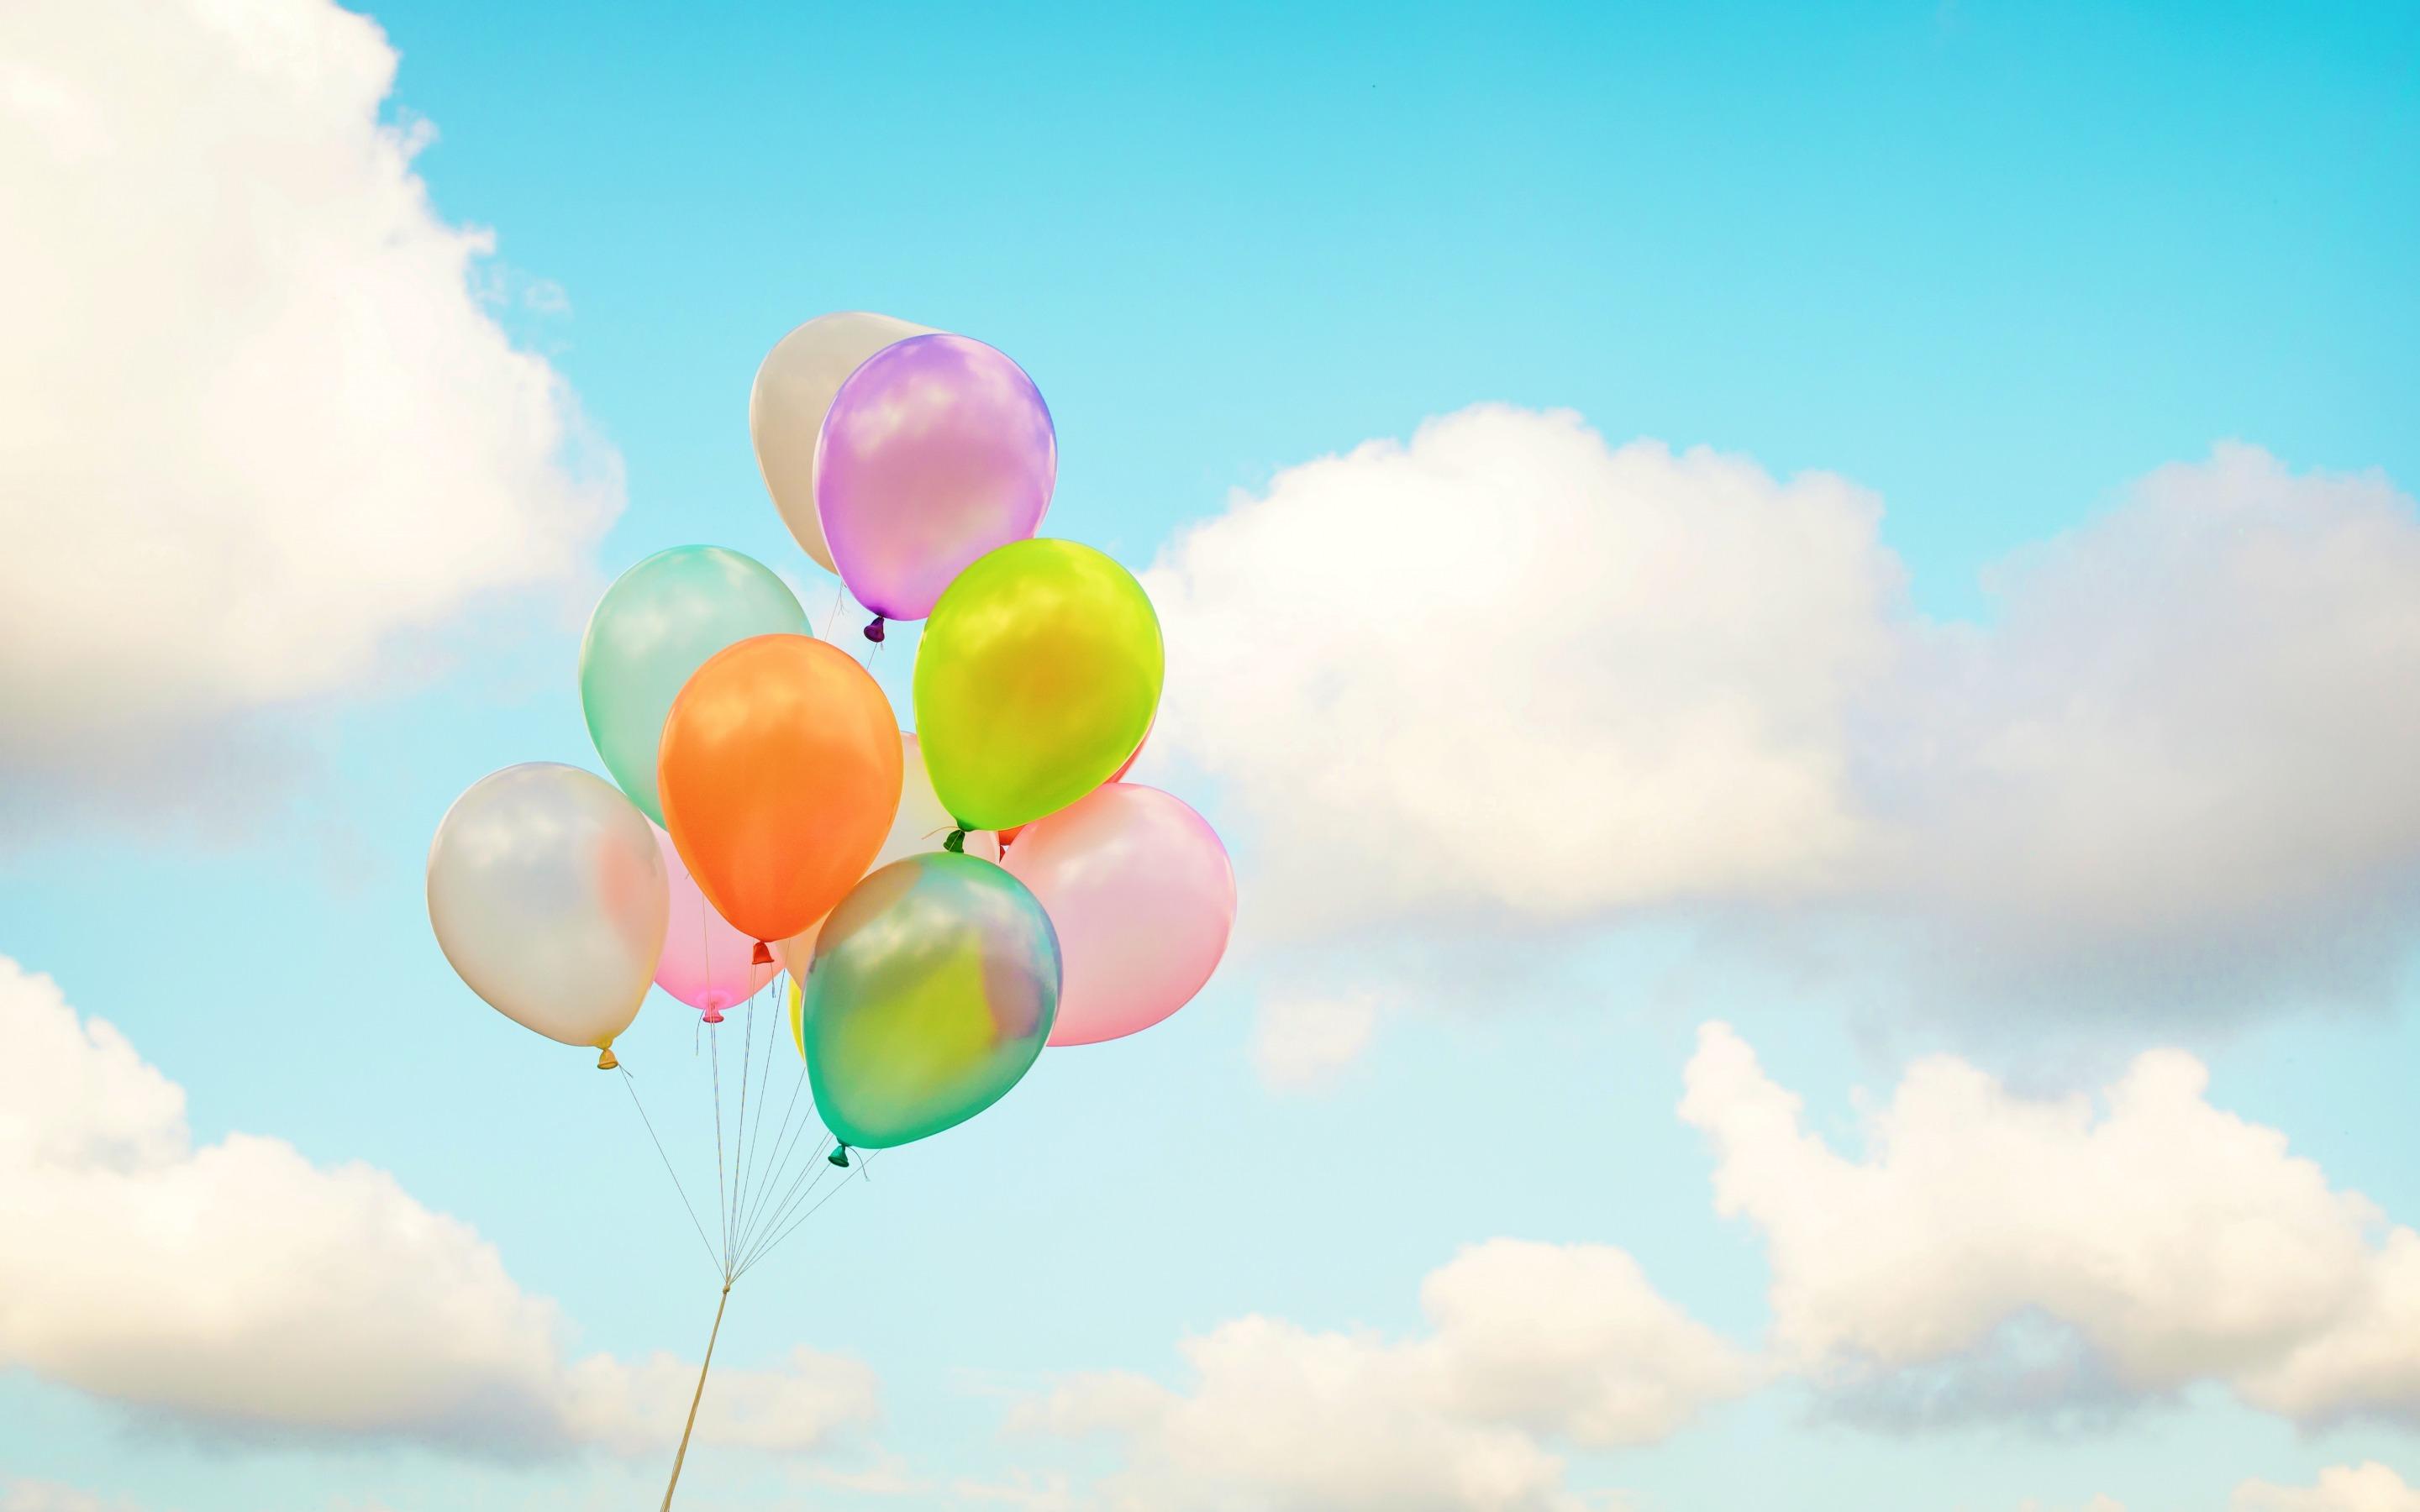 Download wallpaper colorful balloons, blue sky, white